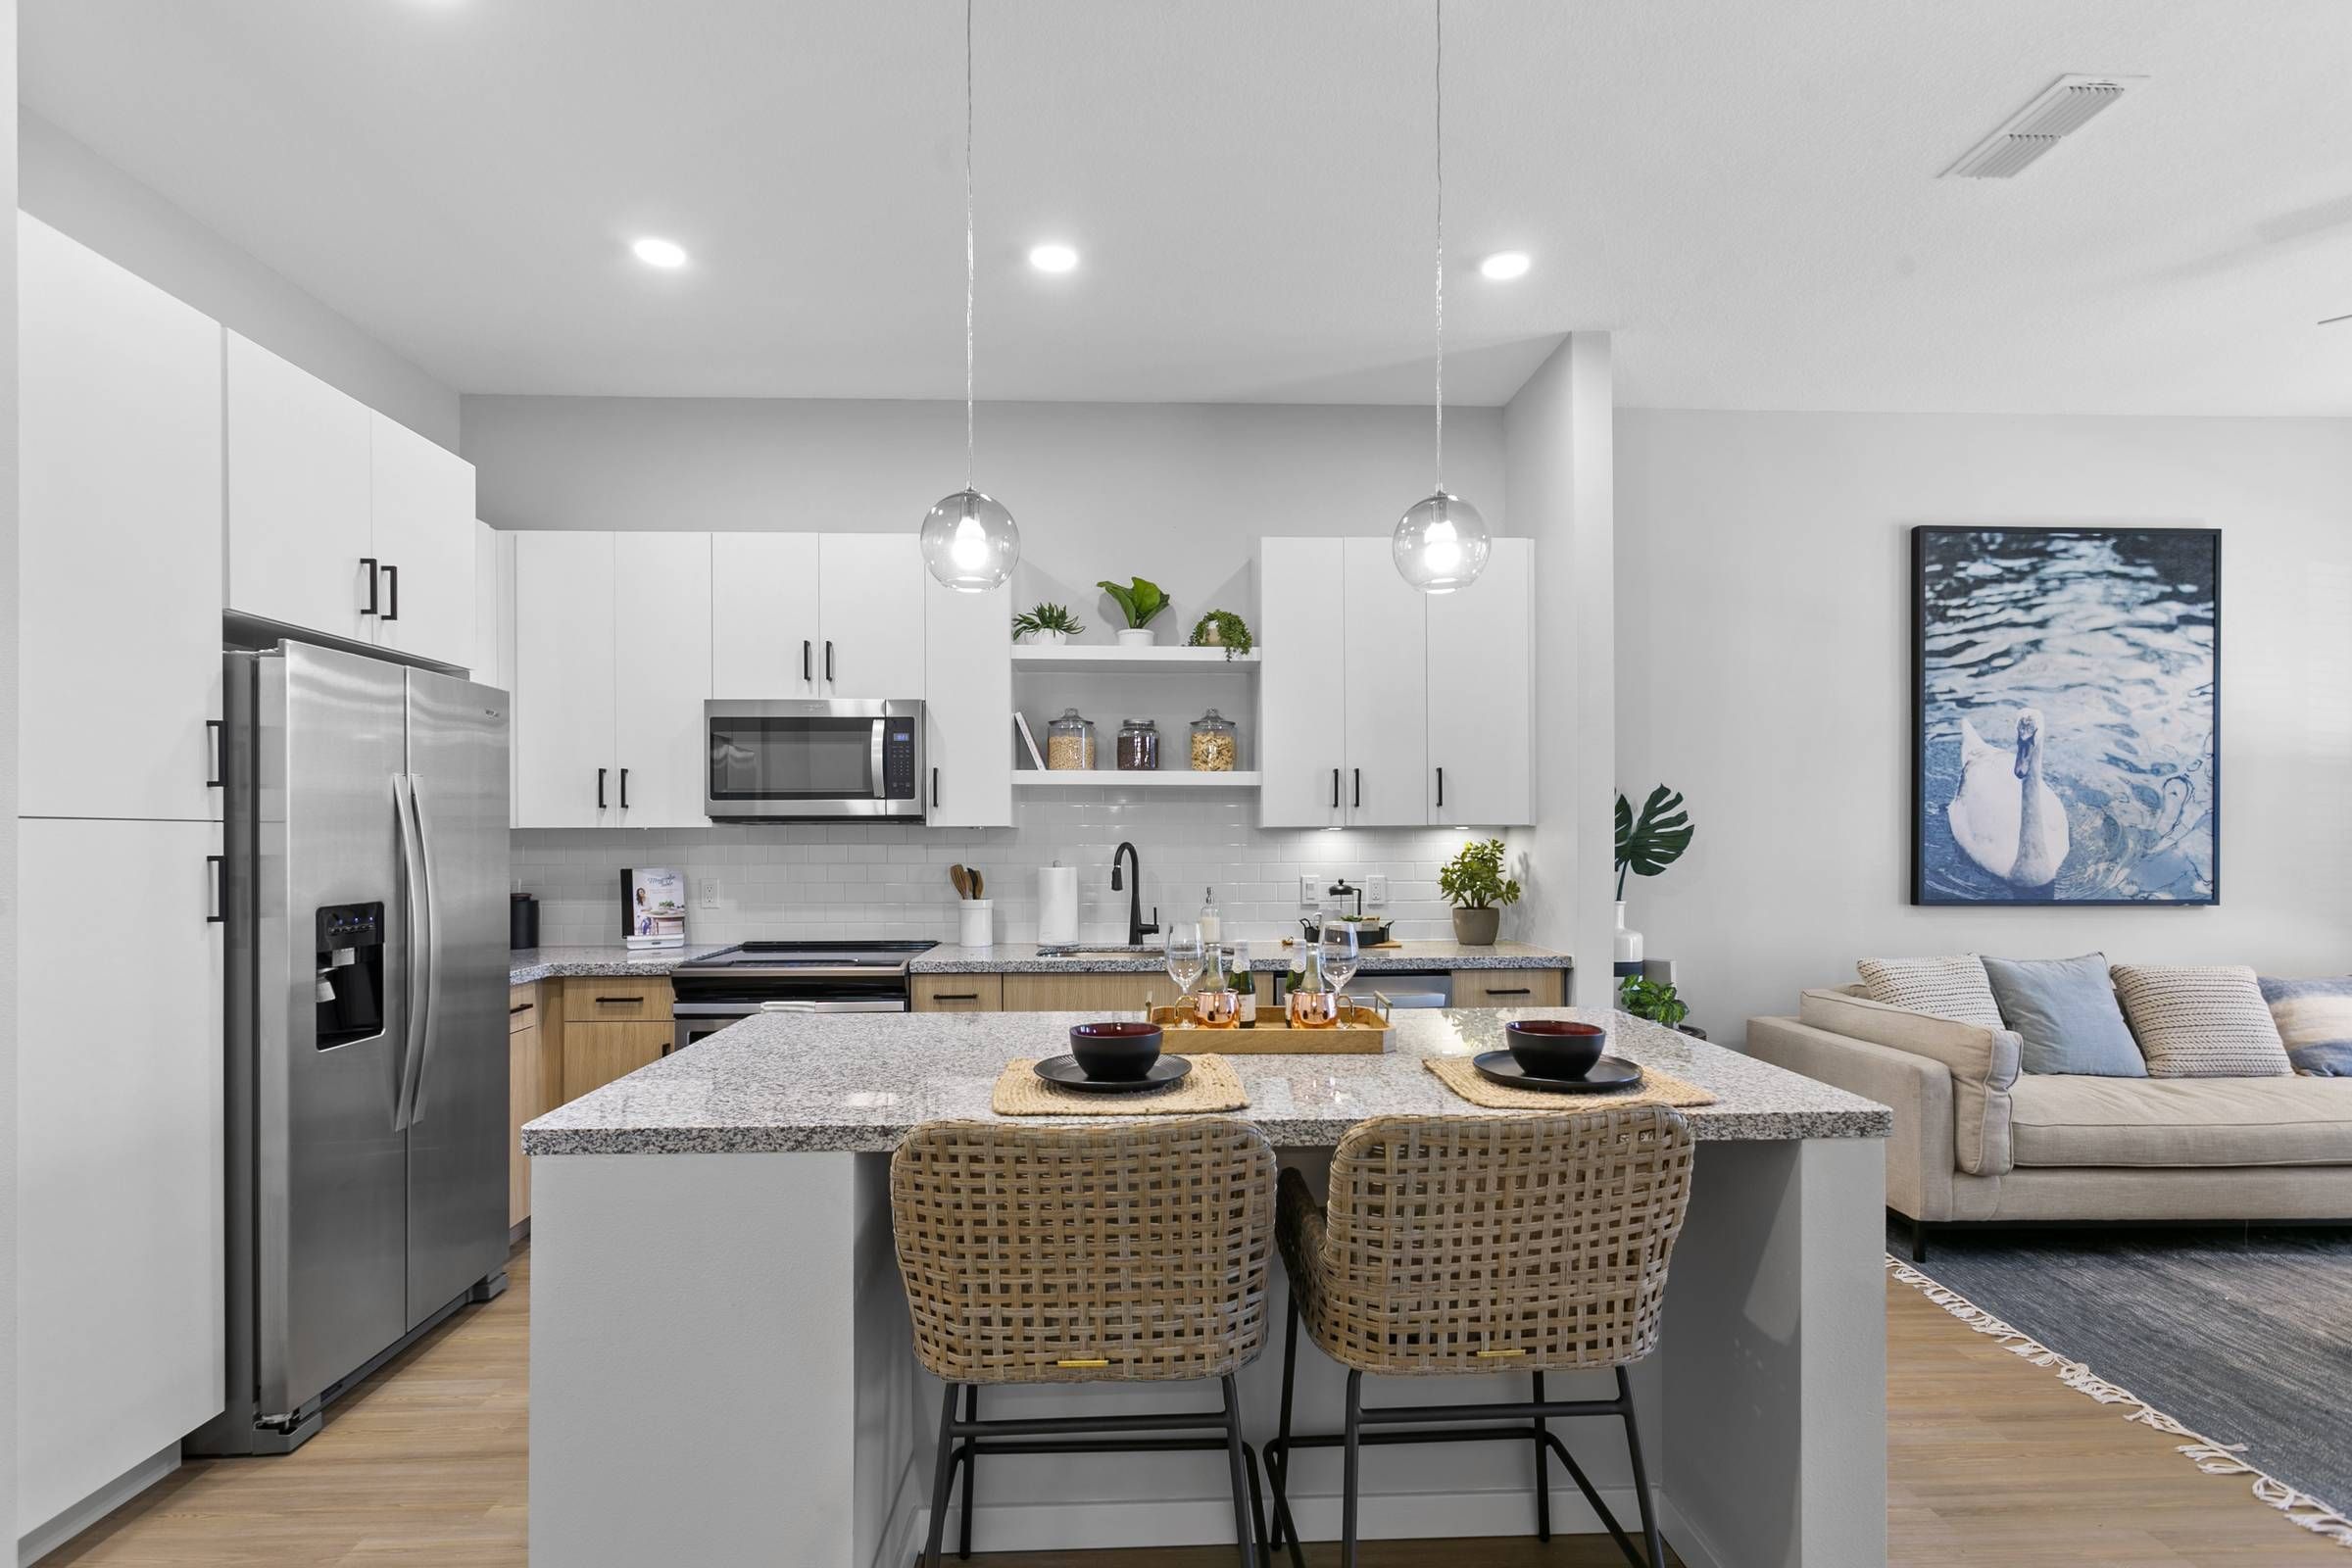 Alta Belleair's kitchen and dining space, boasting minimalist design, clean white surfaces, and a dining area that opens into the inviting living room.